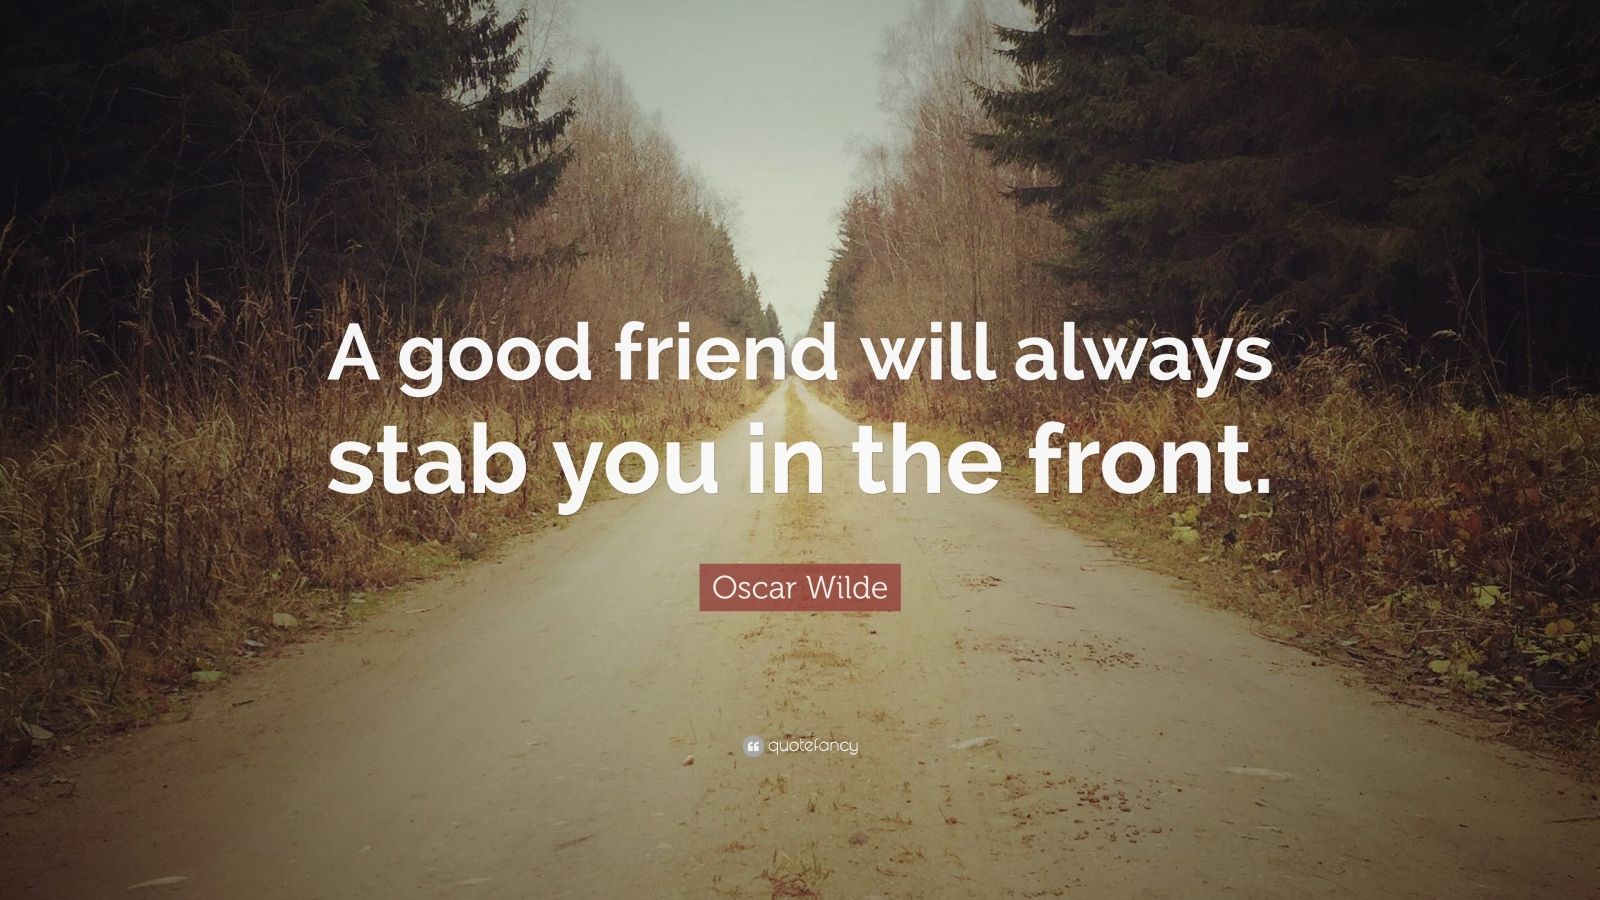 Oscar Wilde Quote: “A good friend will always stab you in the front